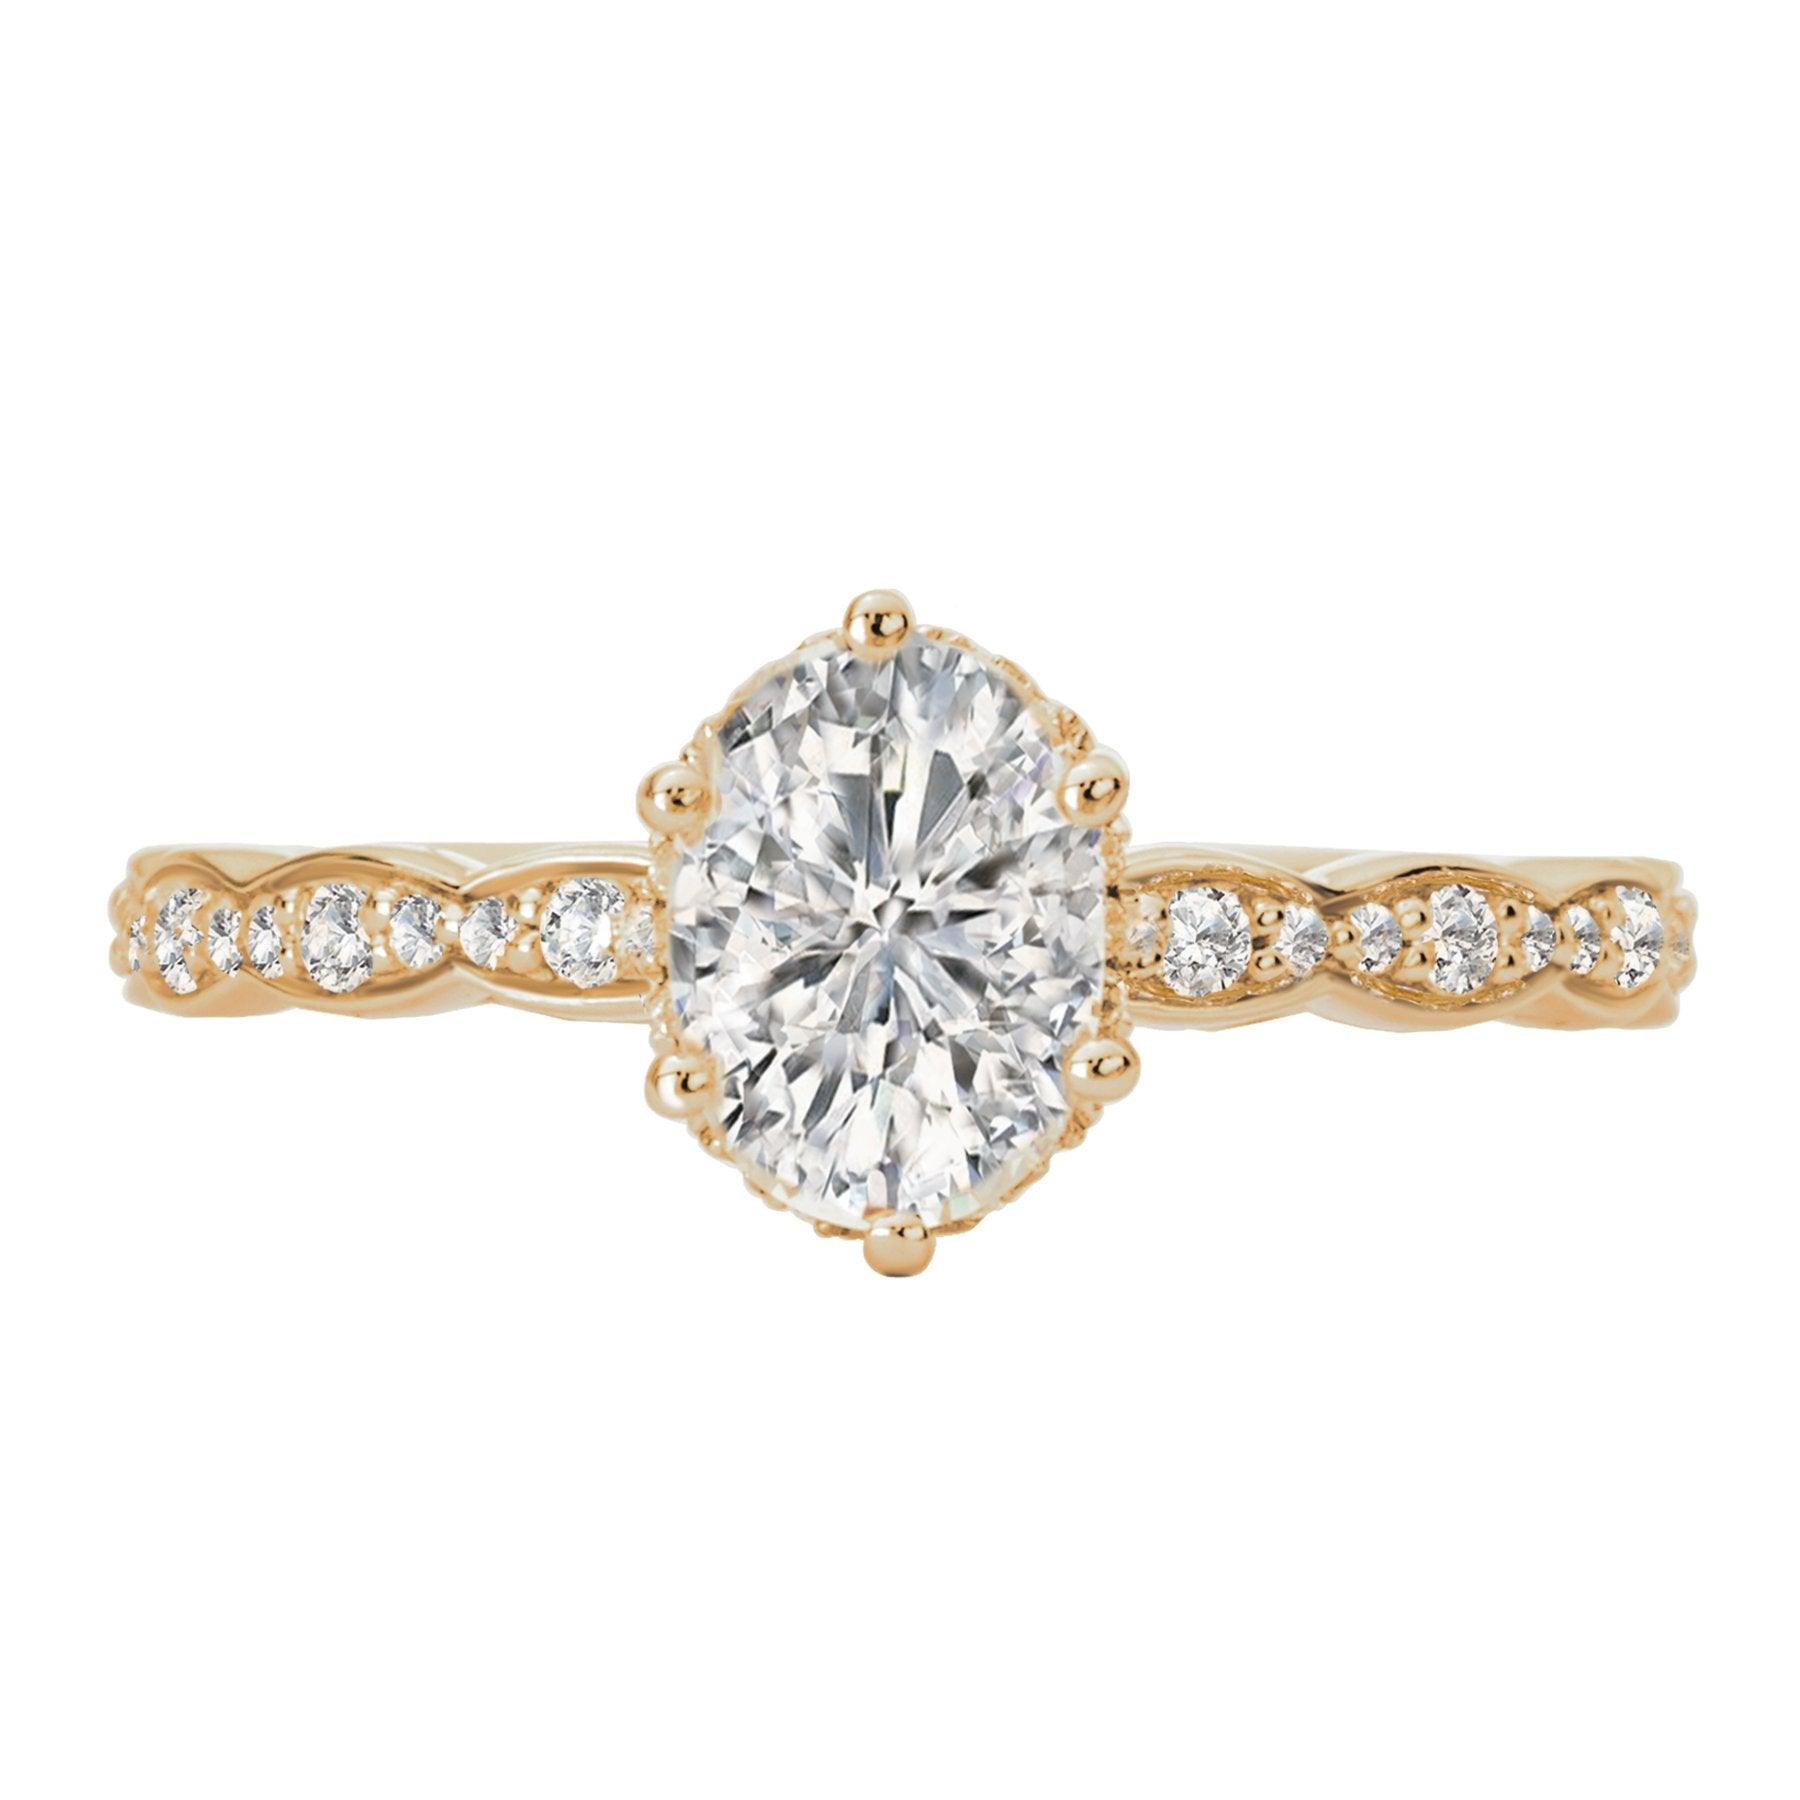 BW JAMES Engagement Rings "The Darby" Halo Semi-Mount Diamond Ring